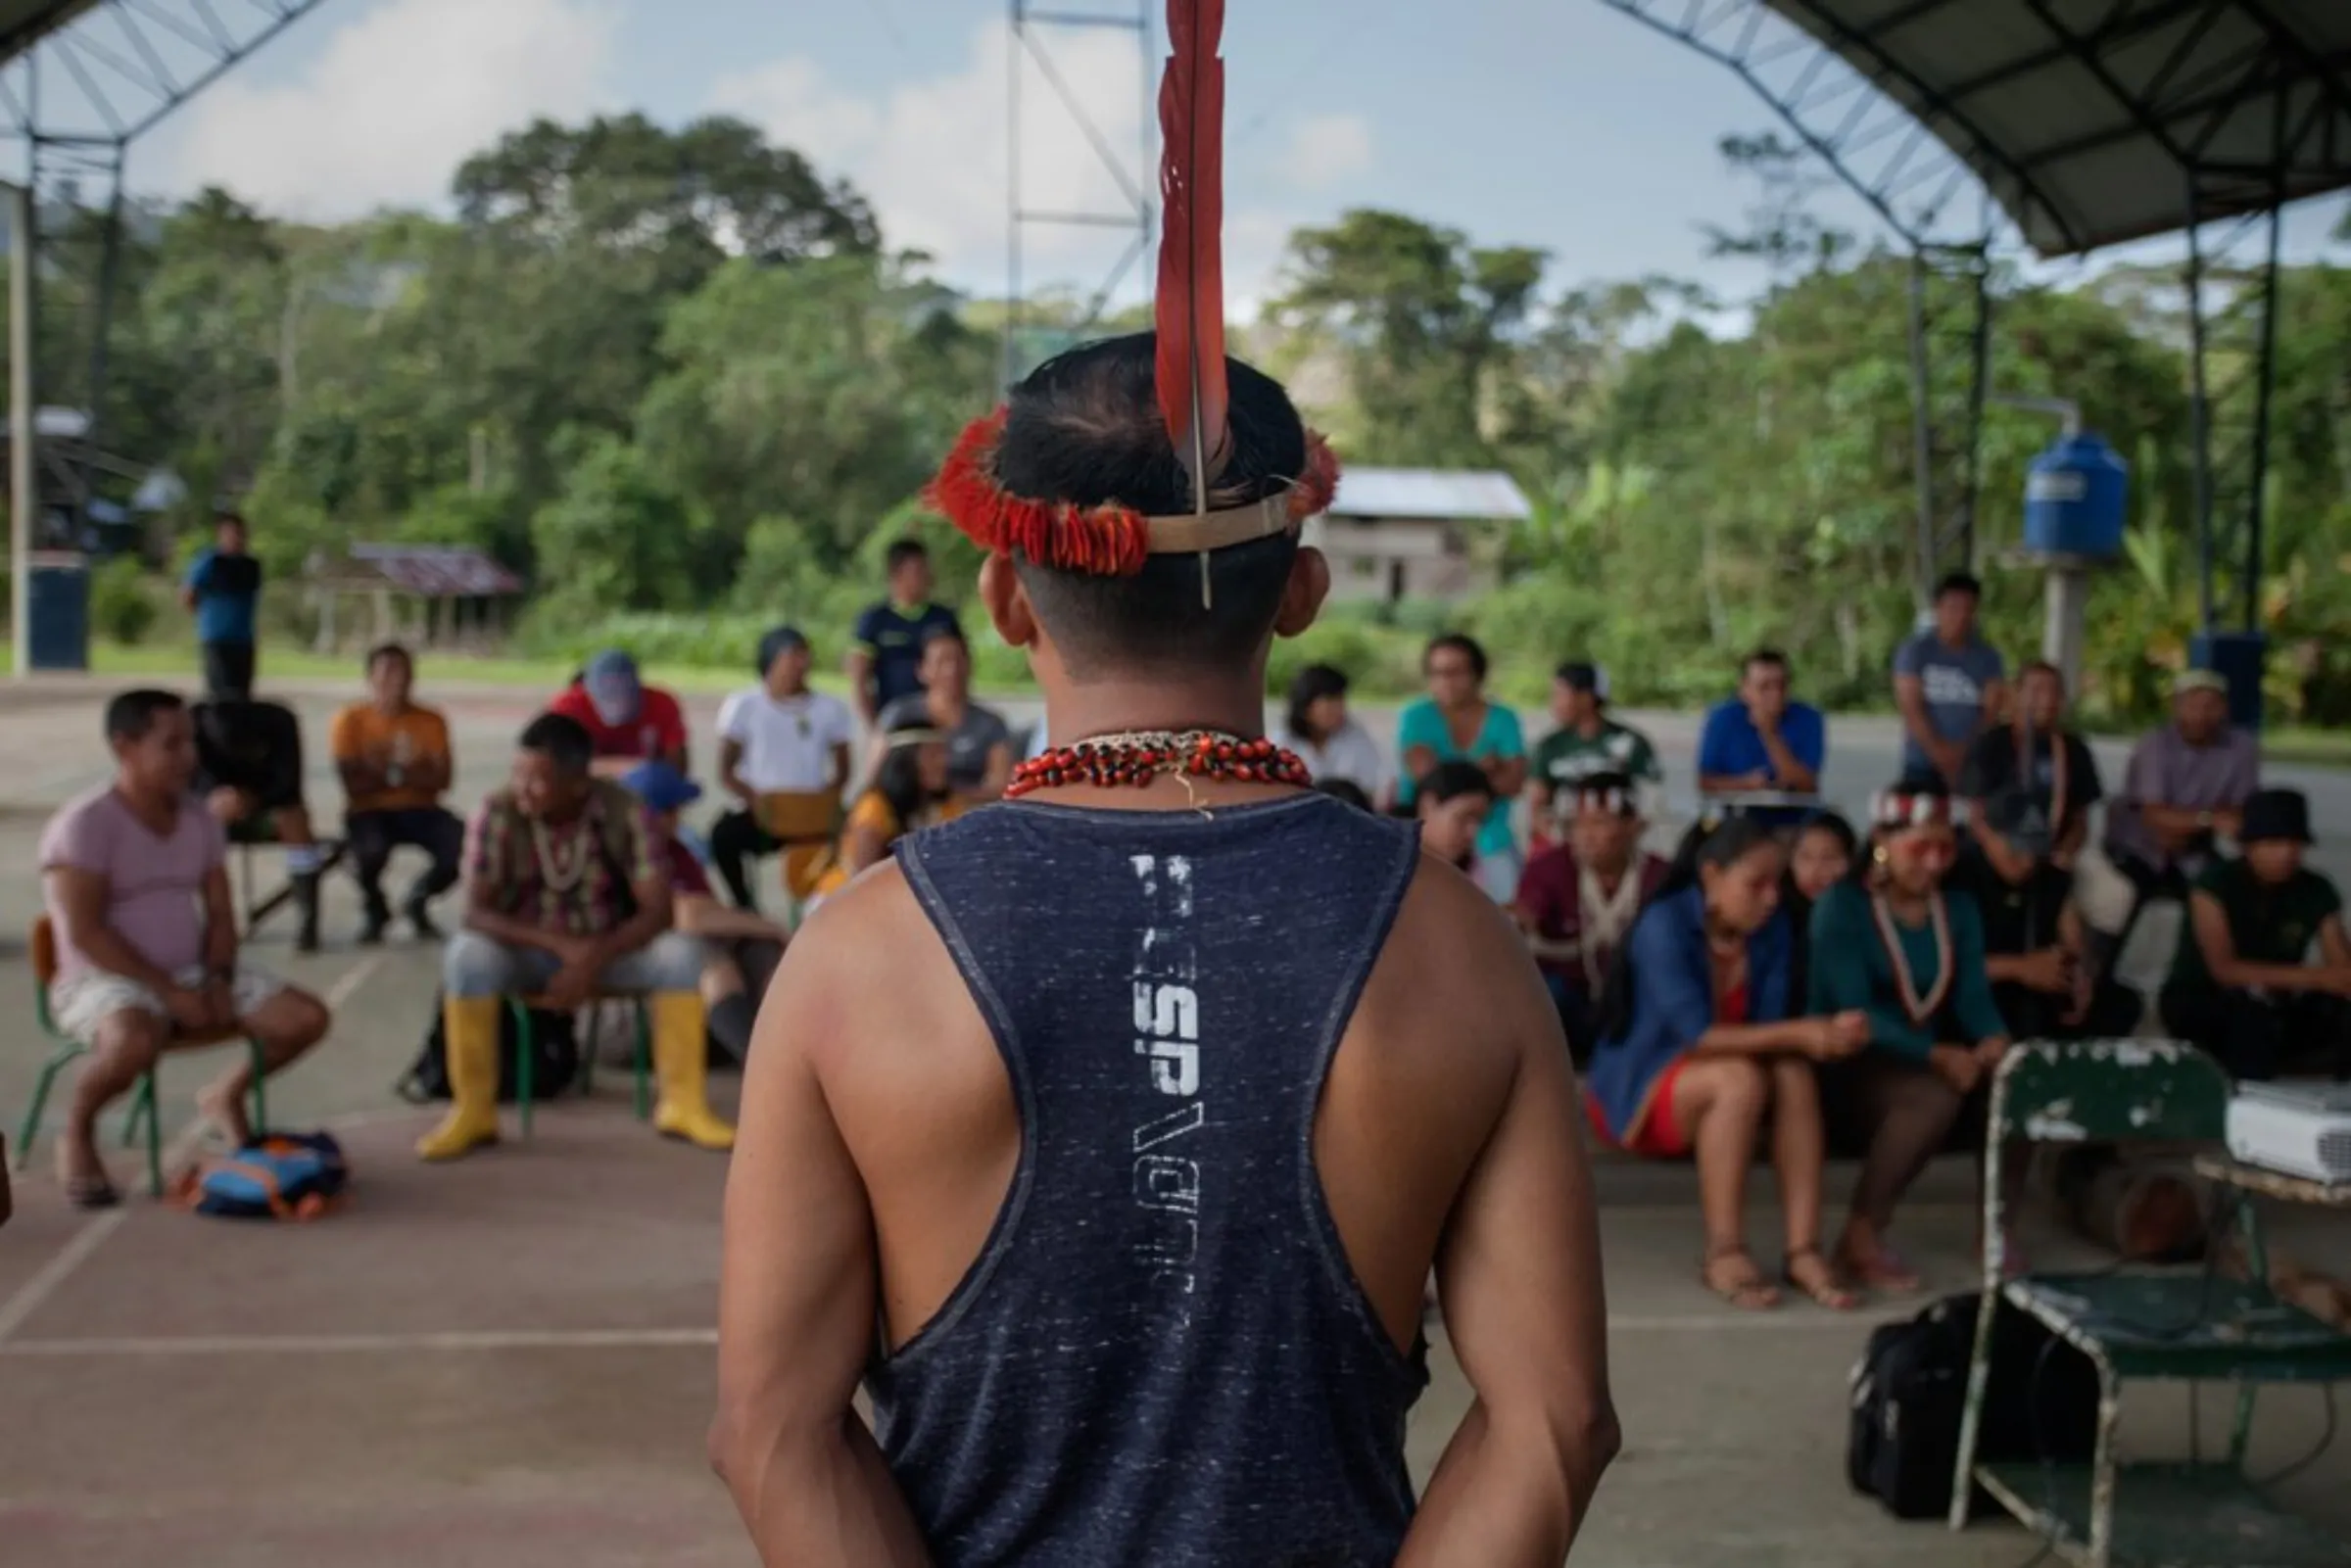 Opi Nenquimo, an indigenous leader of the Pastaza Waorani people, addresses his community at a workshop in a rainforest riverside village in the province of Pastaza, Ecuador, on April 26, 2022